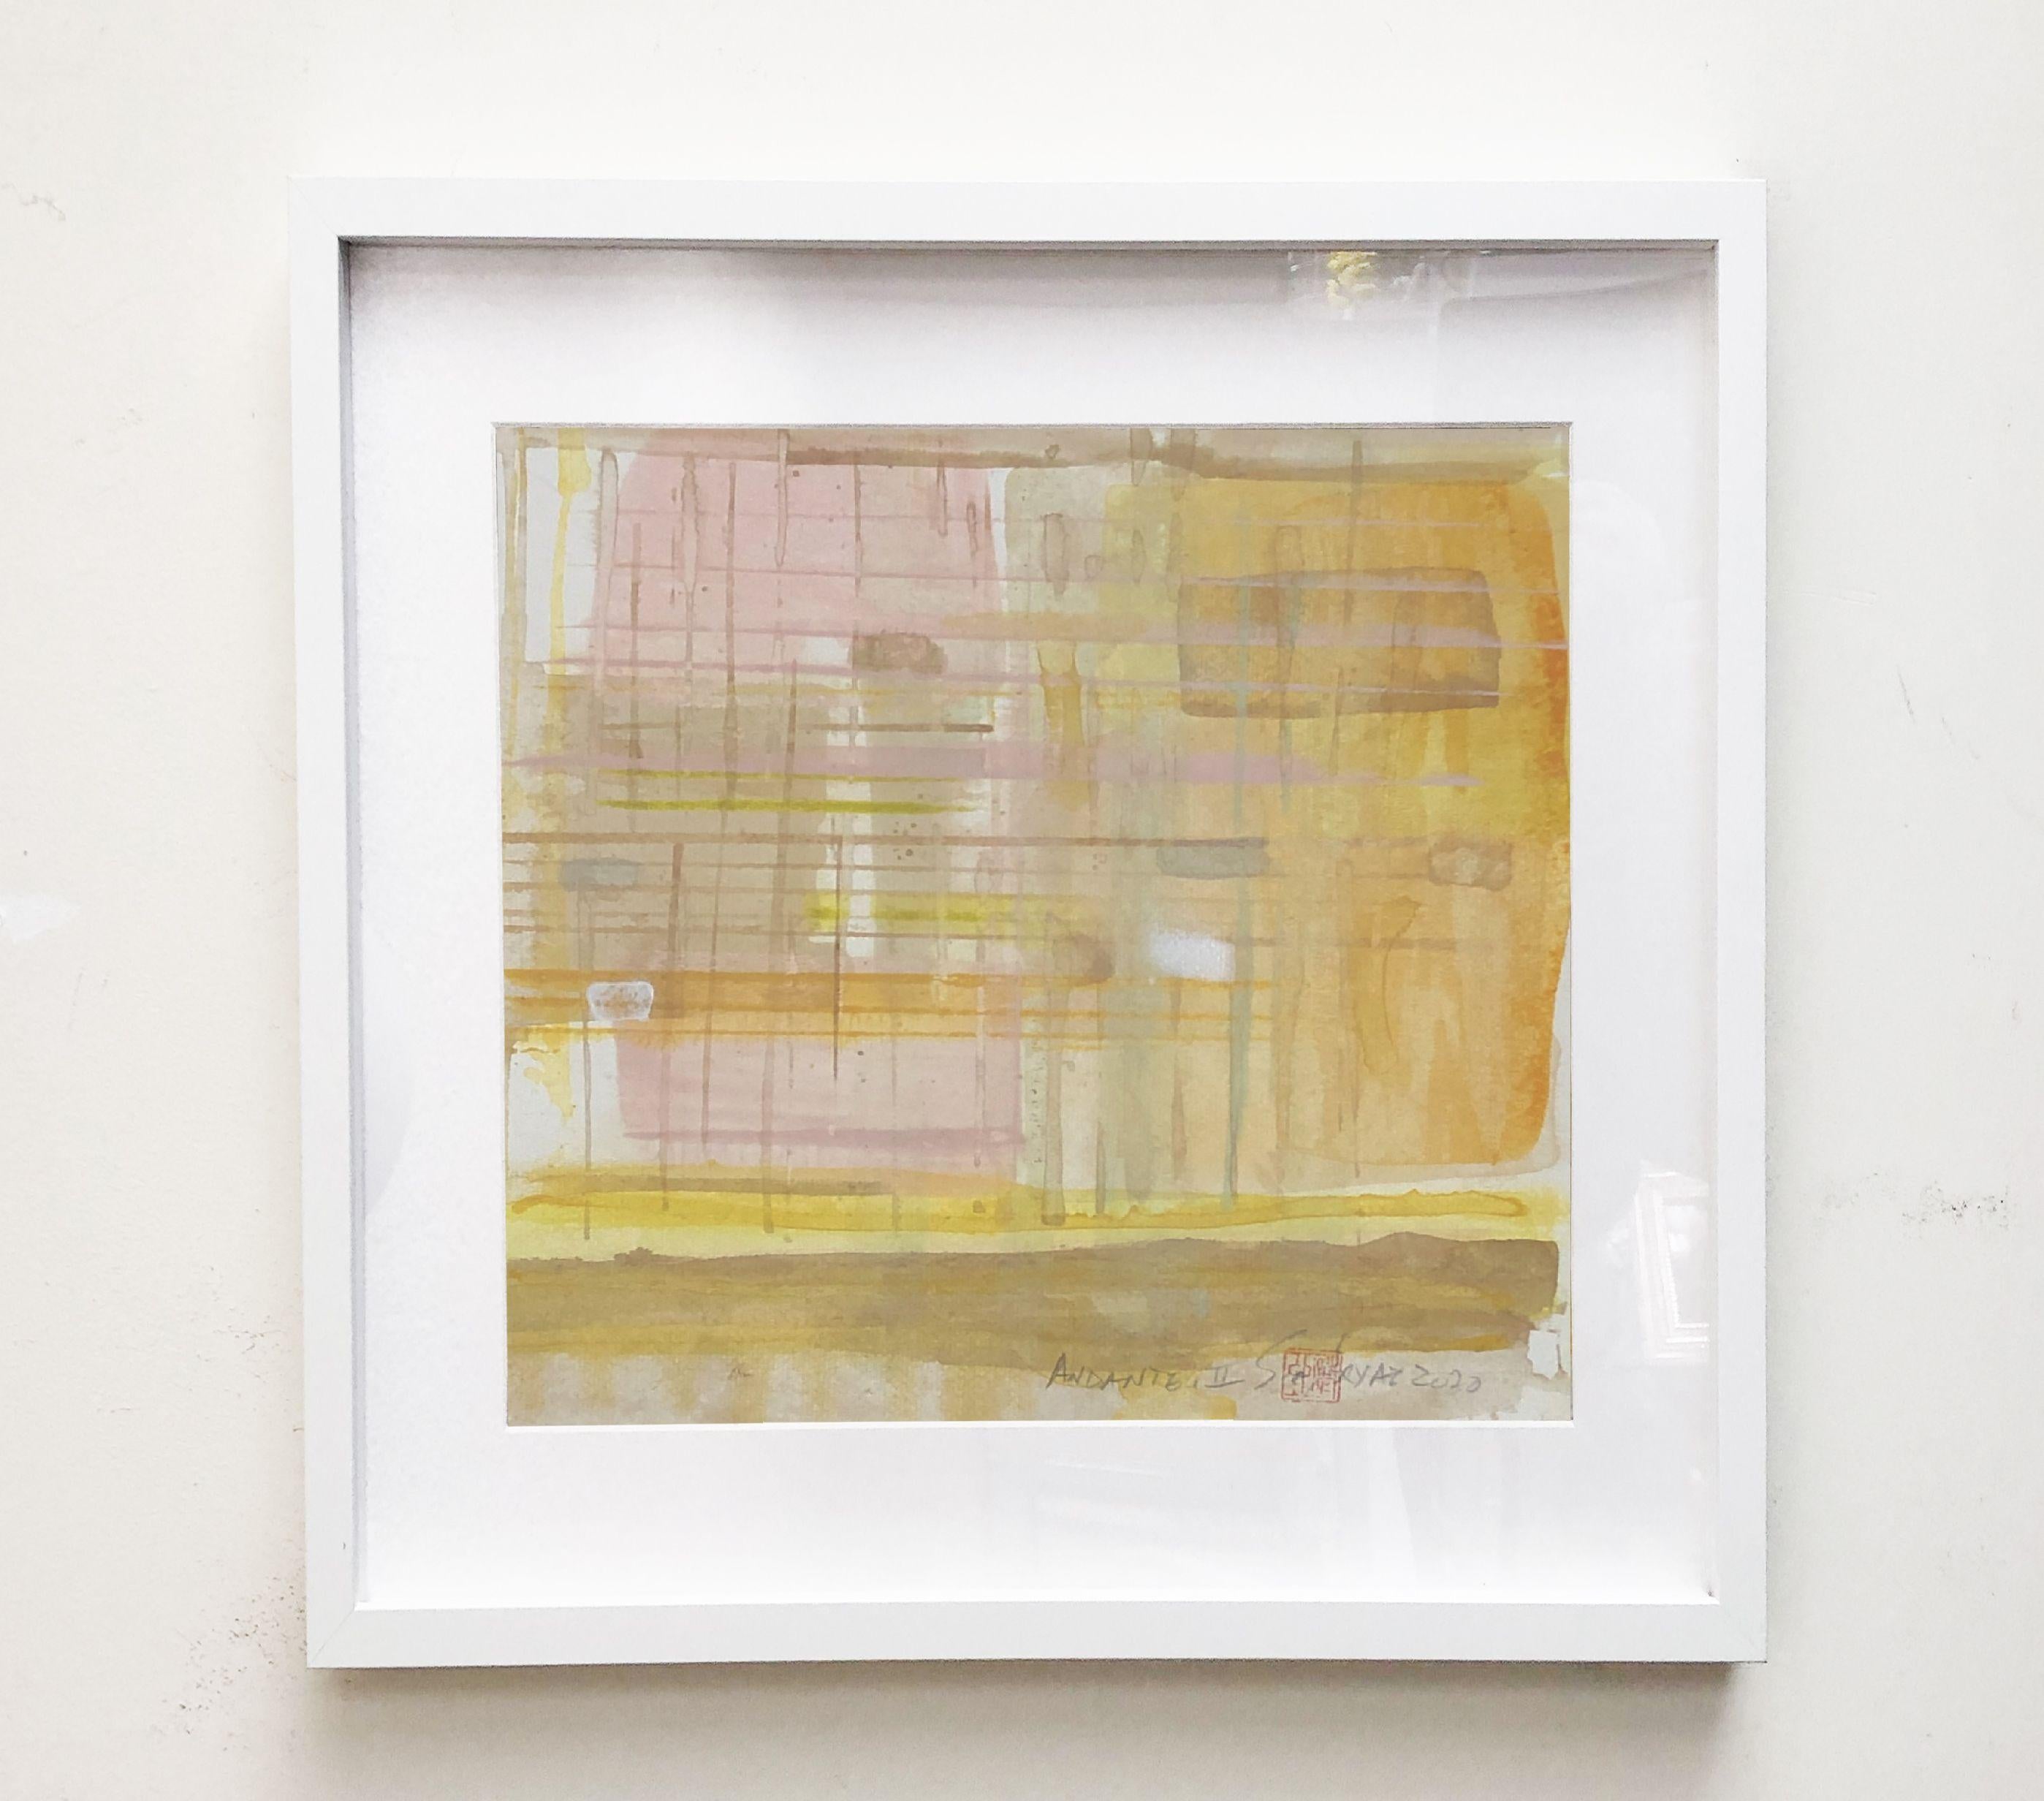 Andante. II Ready to Hang framed Original Abstract Painting  Yellow stands for playful and optimistic.   Shades of bold energetic yellow race across the palest white and beige background.   This lively original painting on heavy stock brings a pop